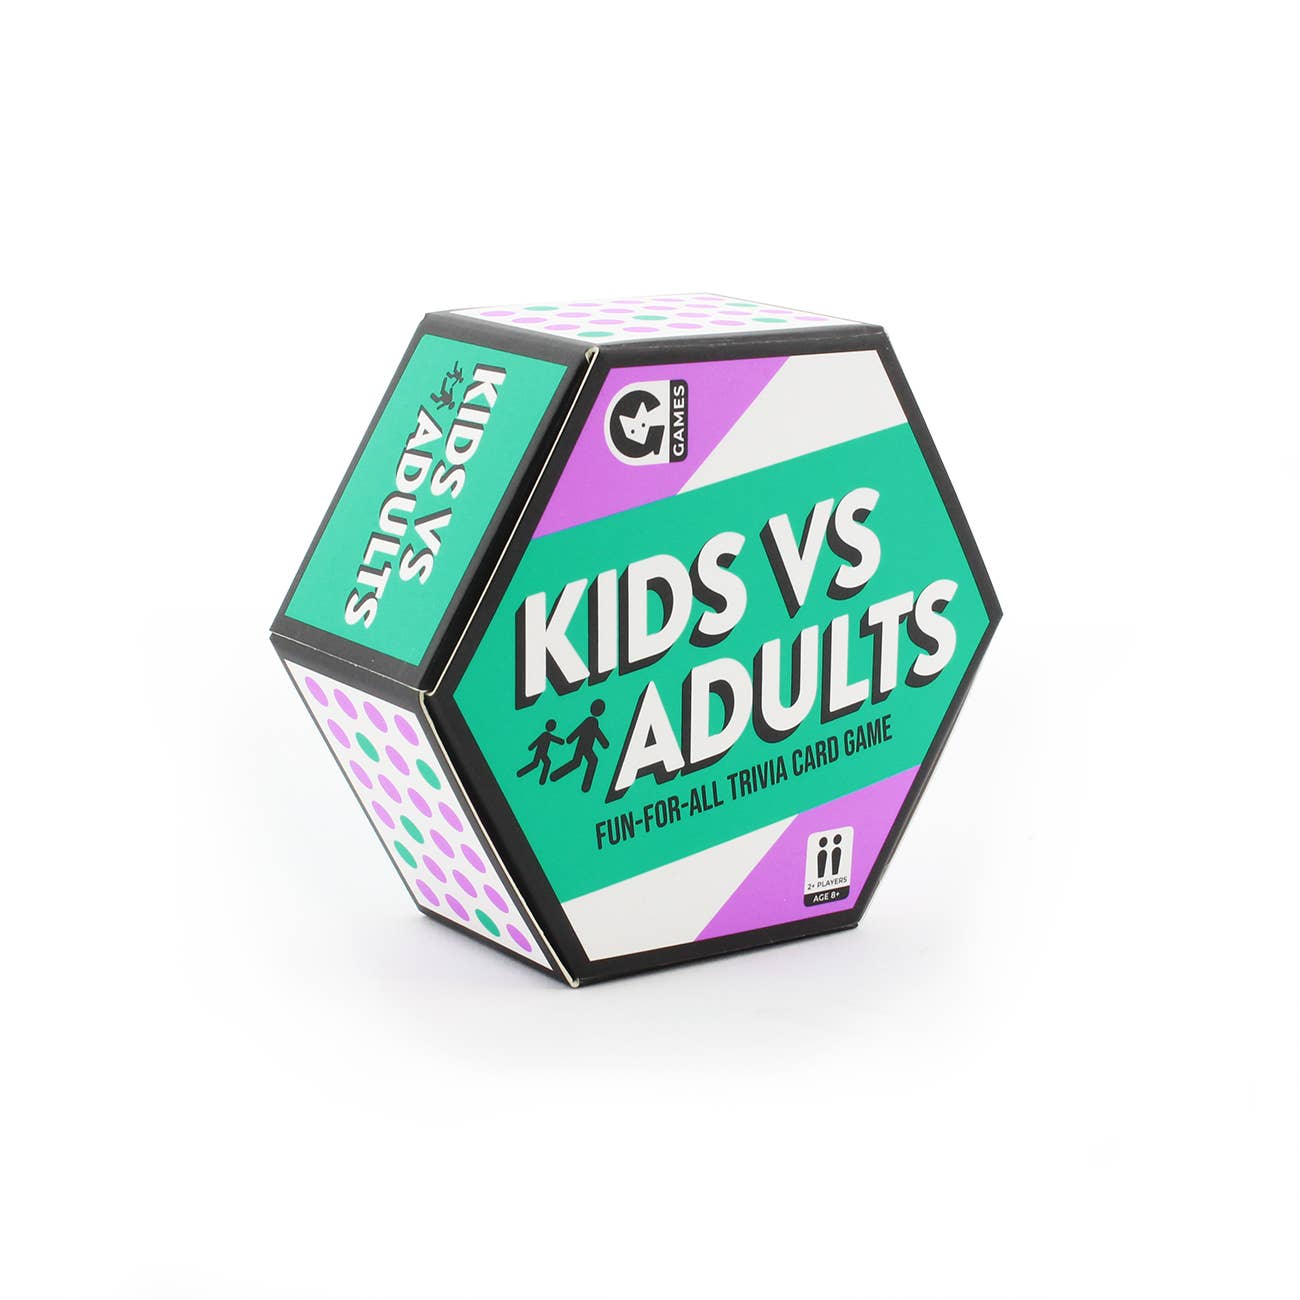 SALE! Kids vs Adults - Fun travel game for families